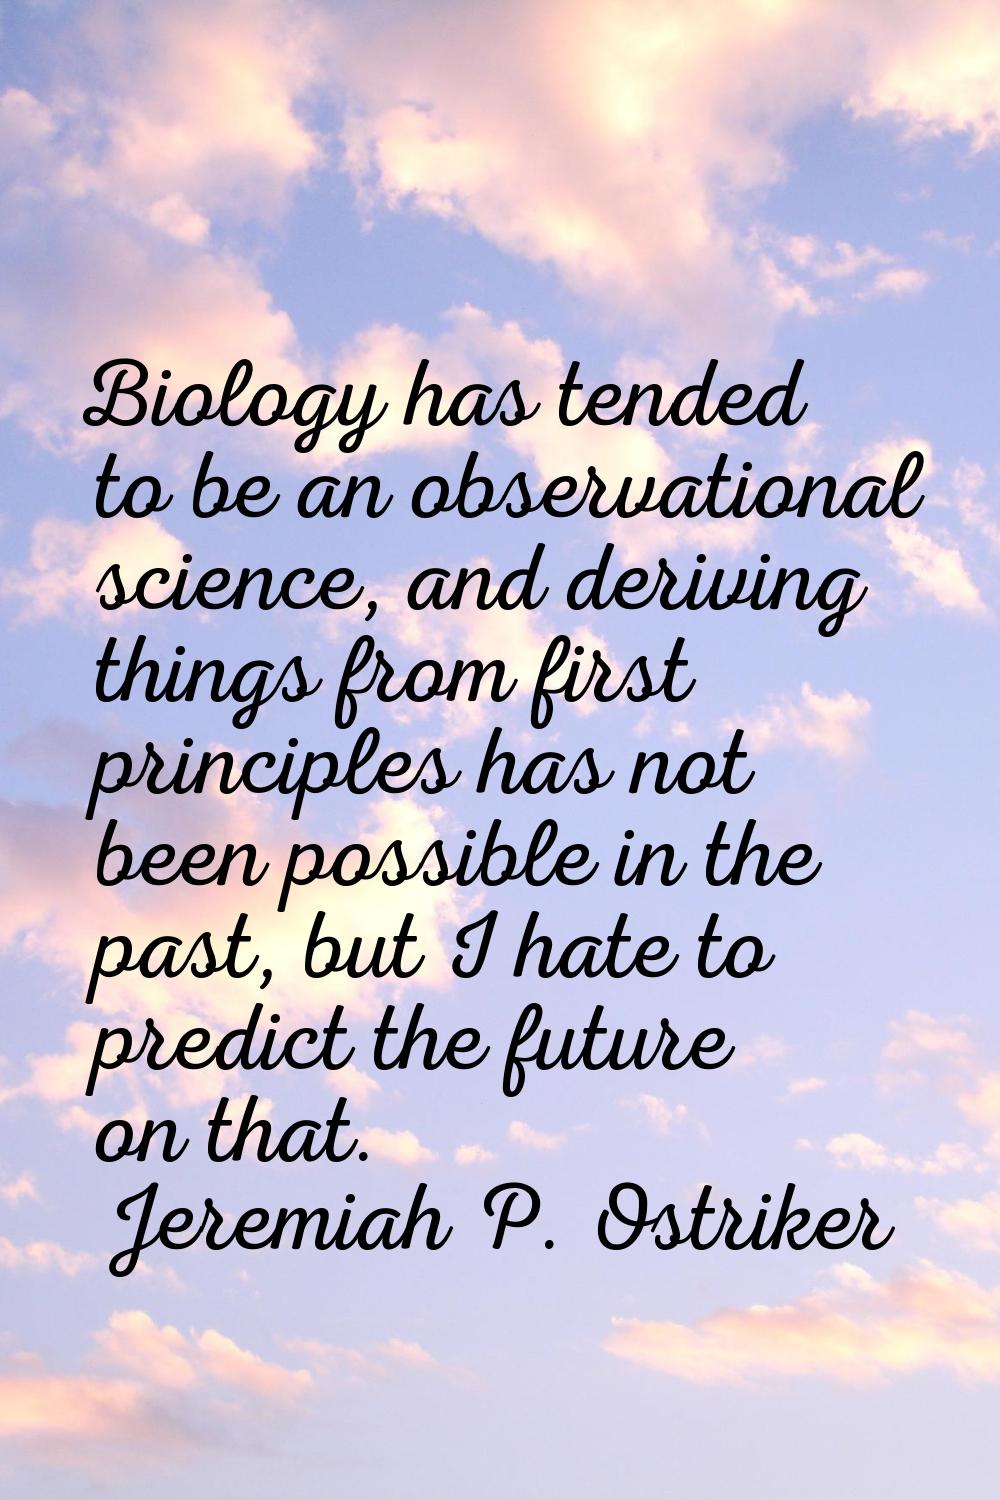 Biology has tended to be an observational science, and deriving things from first principles has no